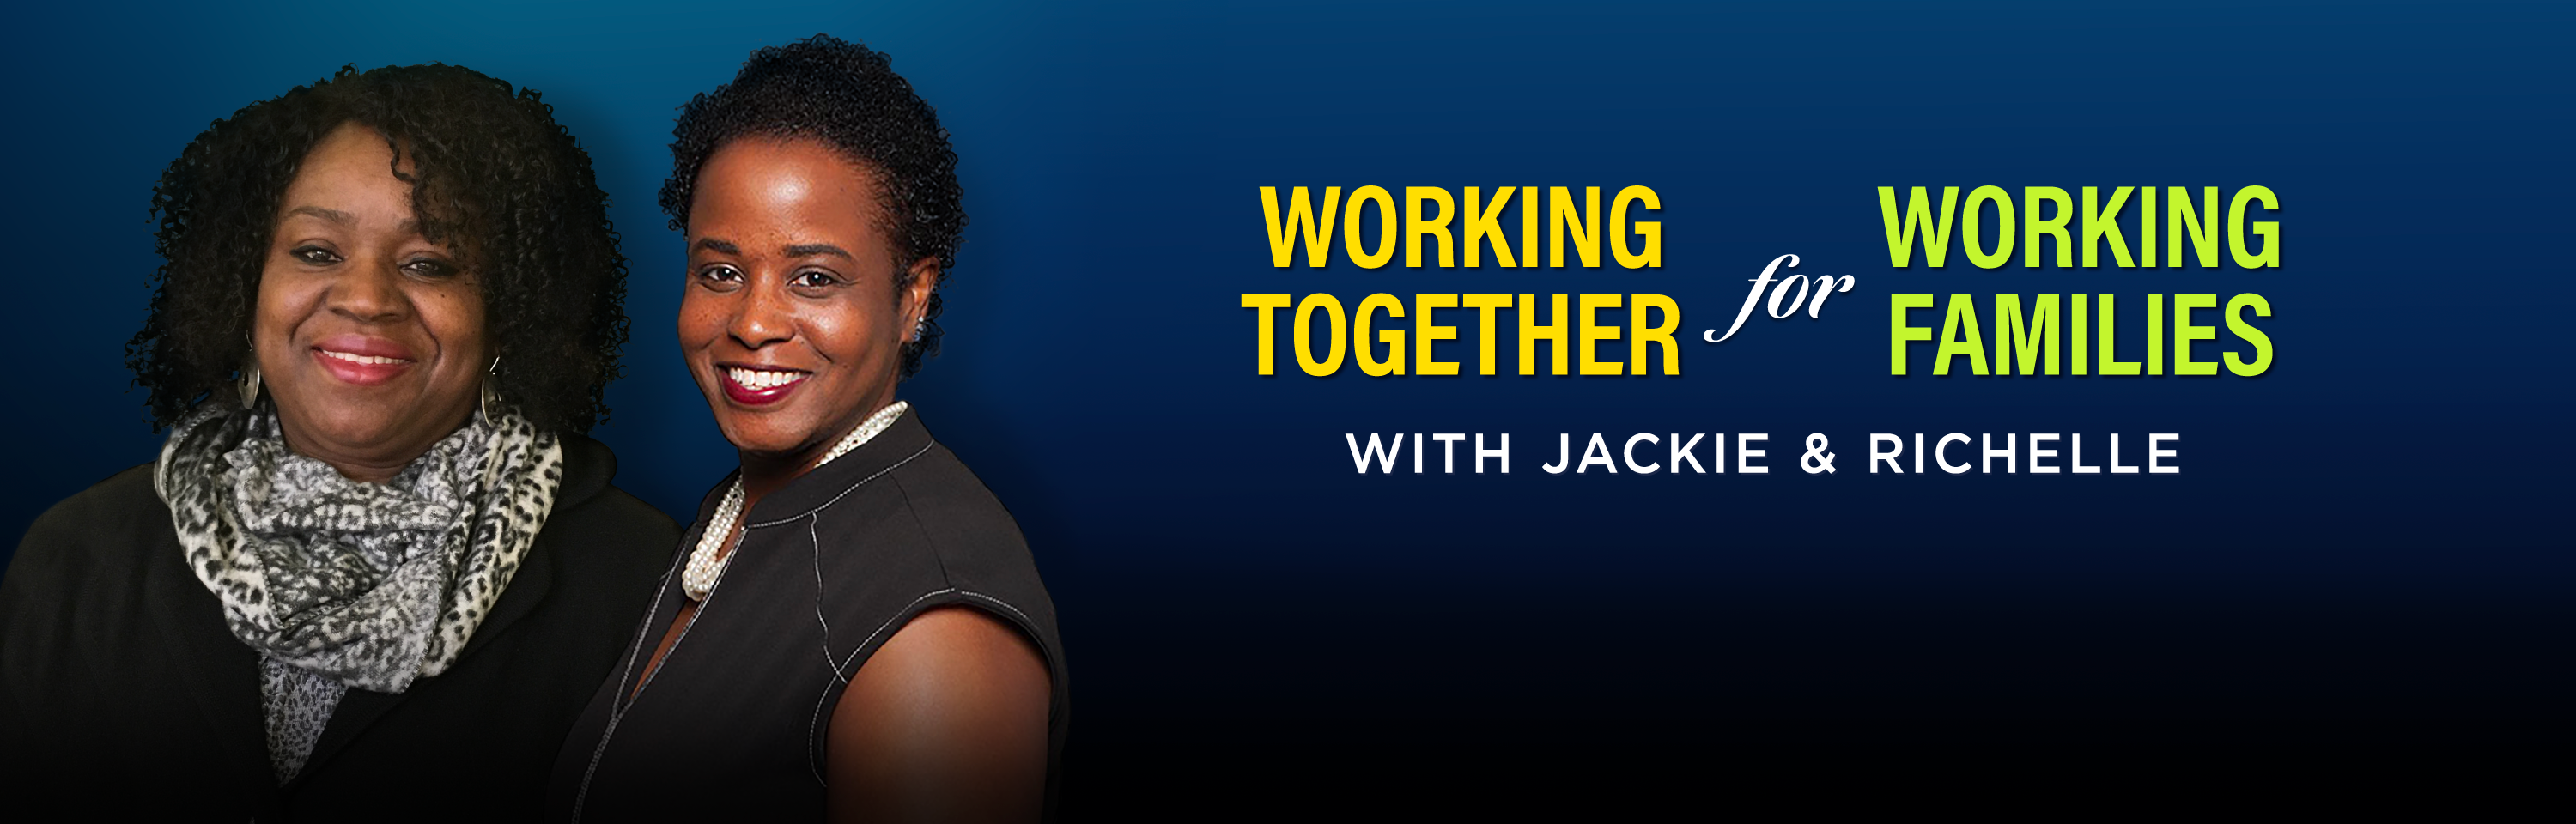 Working Together for Working Families